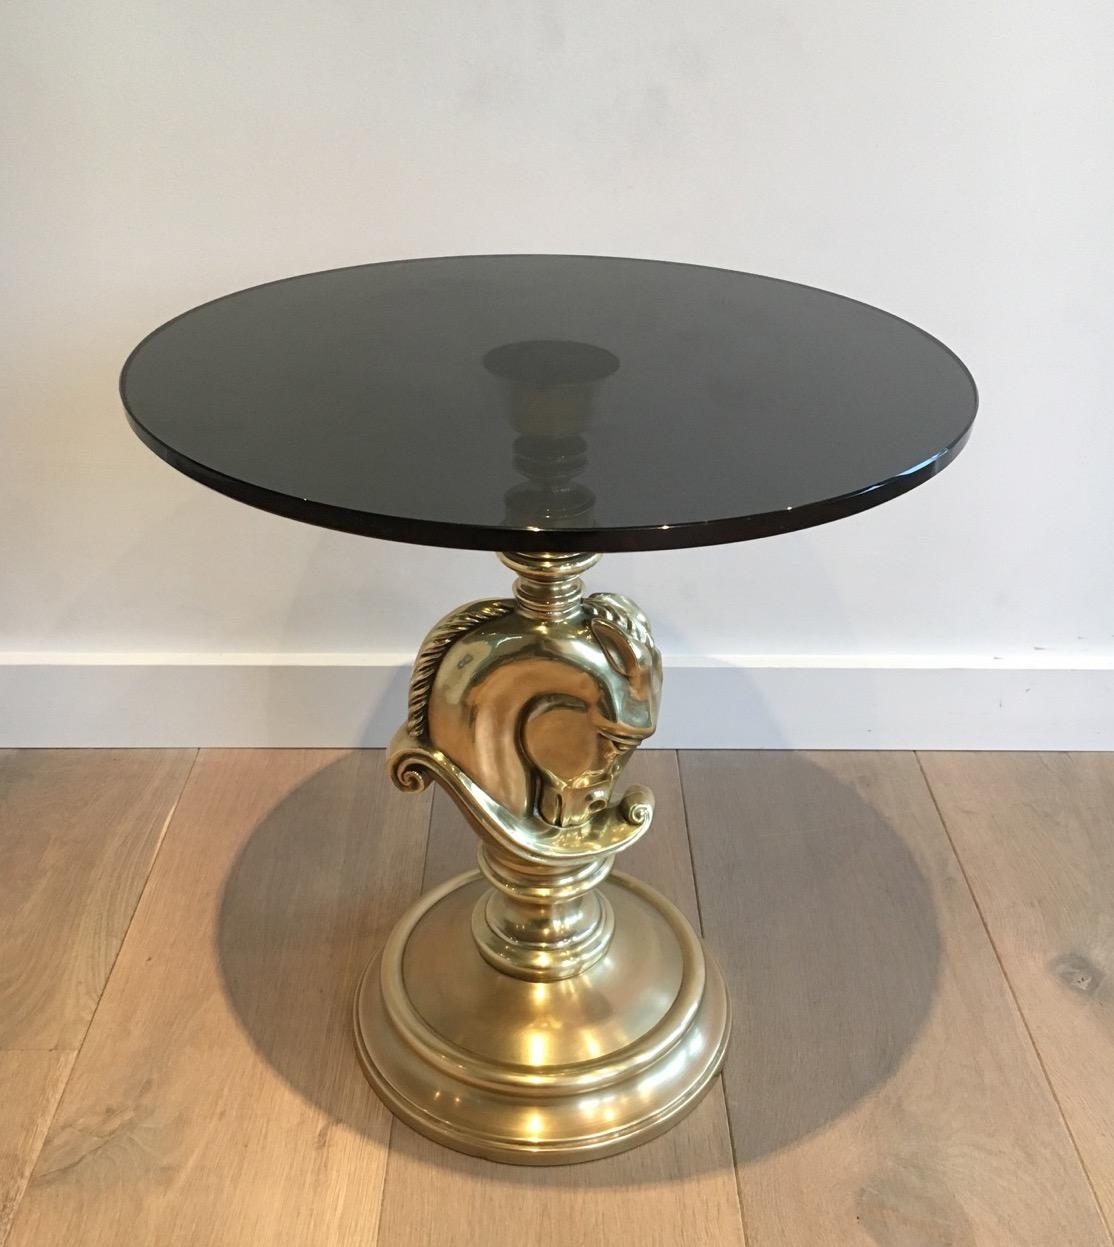 This small round occasional table is made of brass with a thick smoked glass top. This gueridon is a French work, in the style of famous maker Maison Charles, circa 1960.